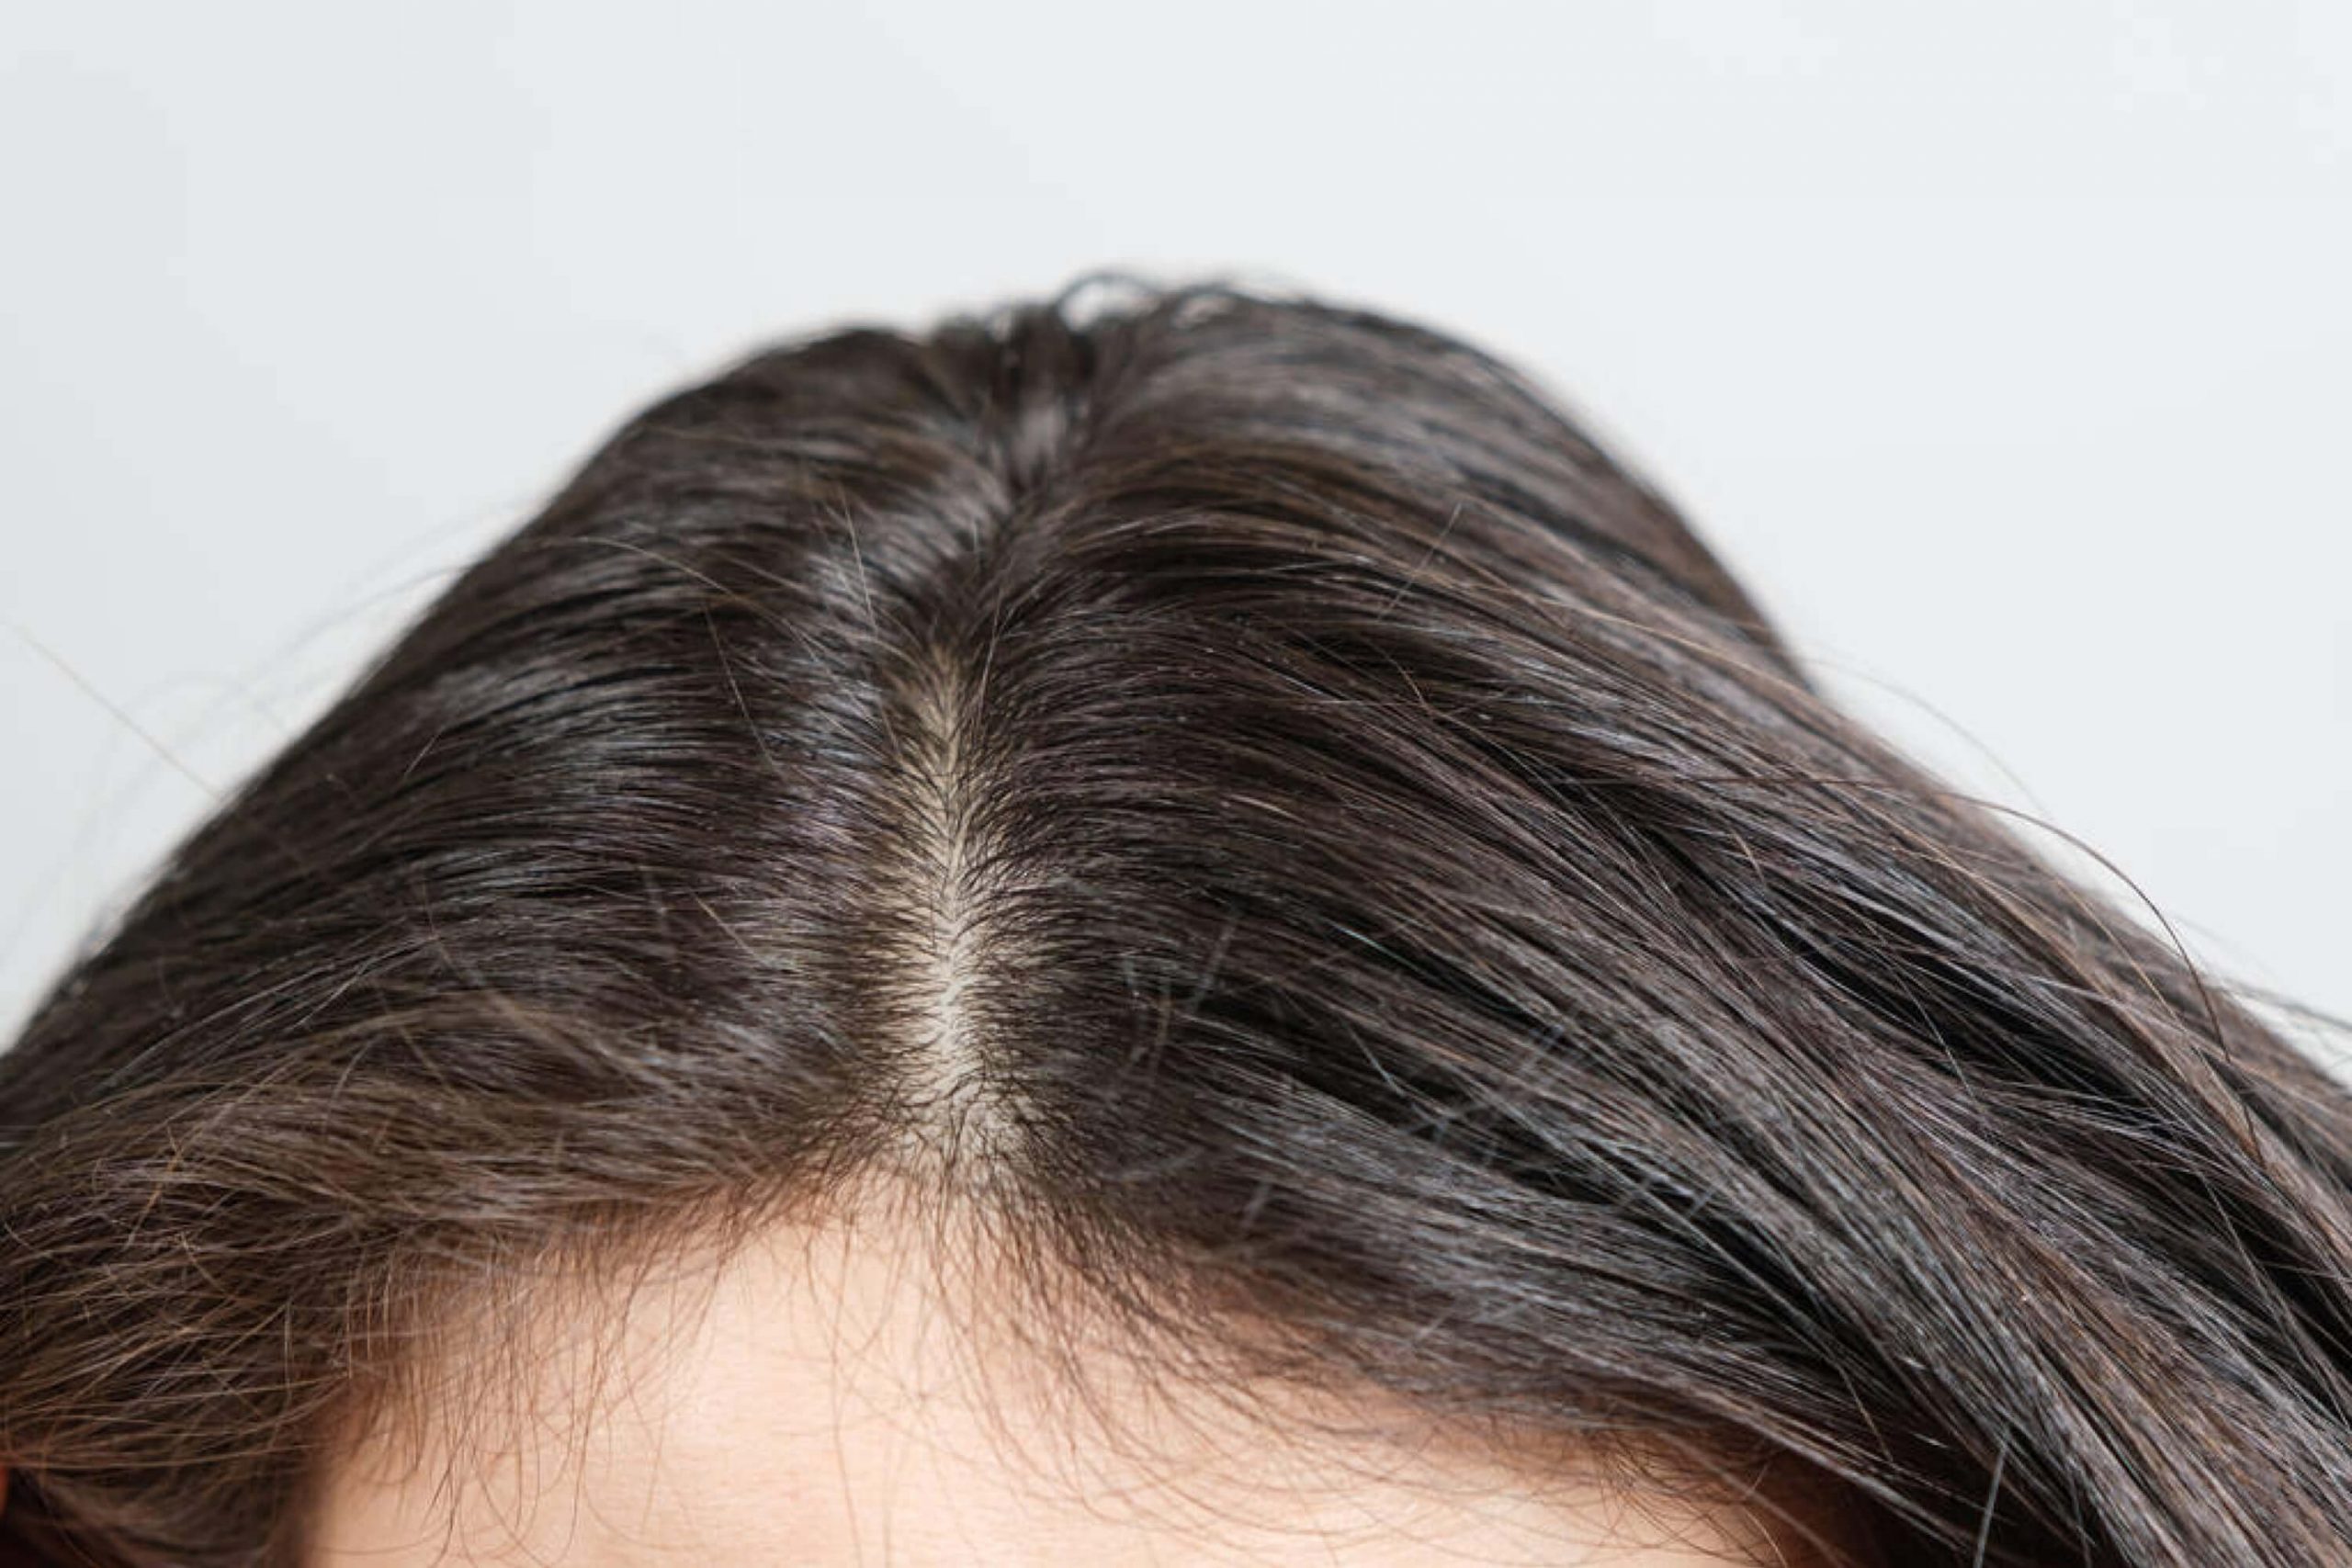 How to Keep Your Hair From Getting Greasy Overnight